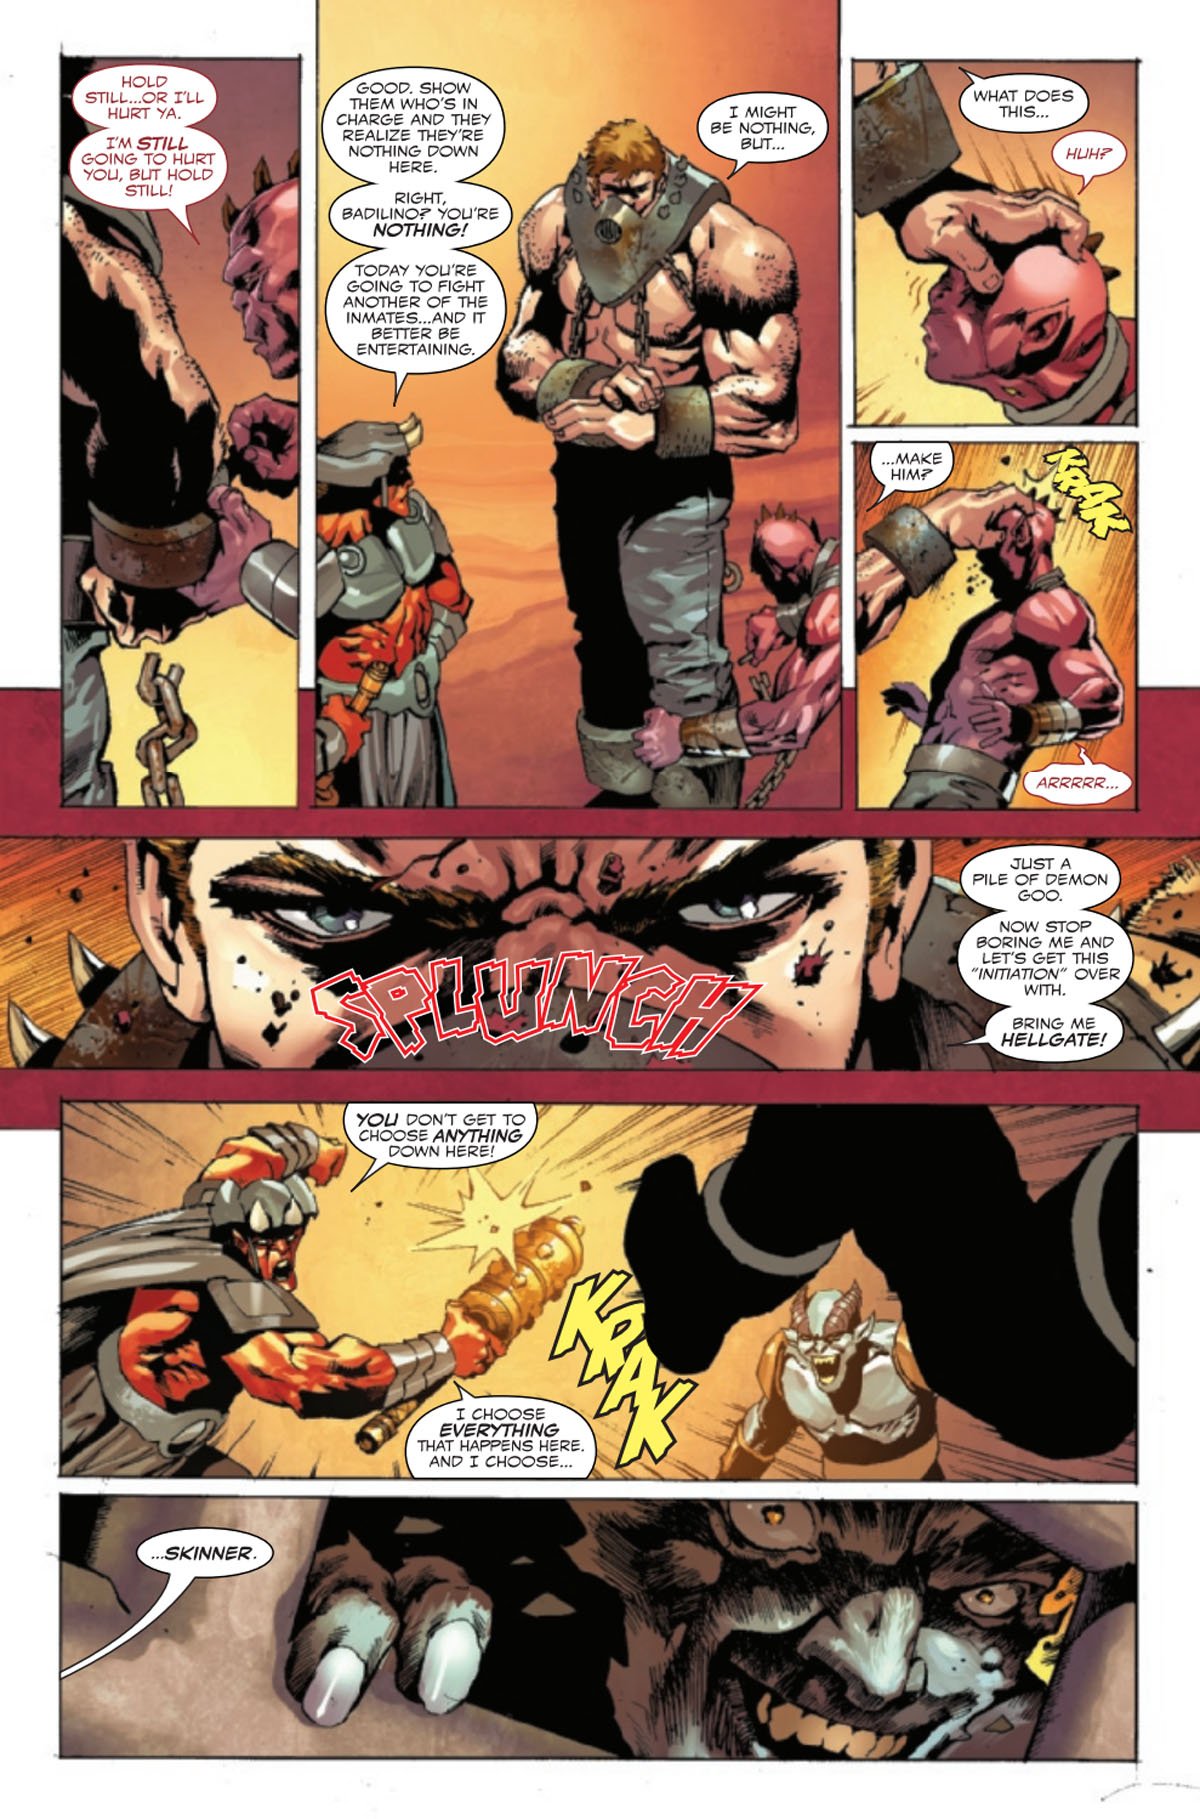 ghost-rider-return-of-vengeance-1-page-1